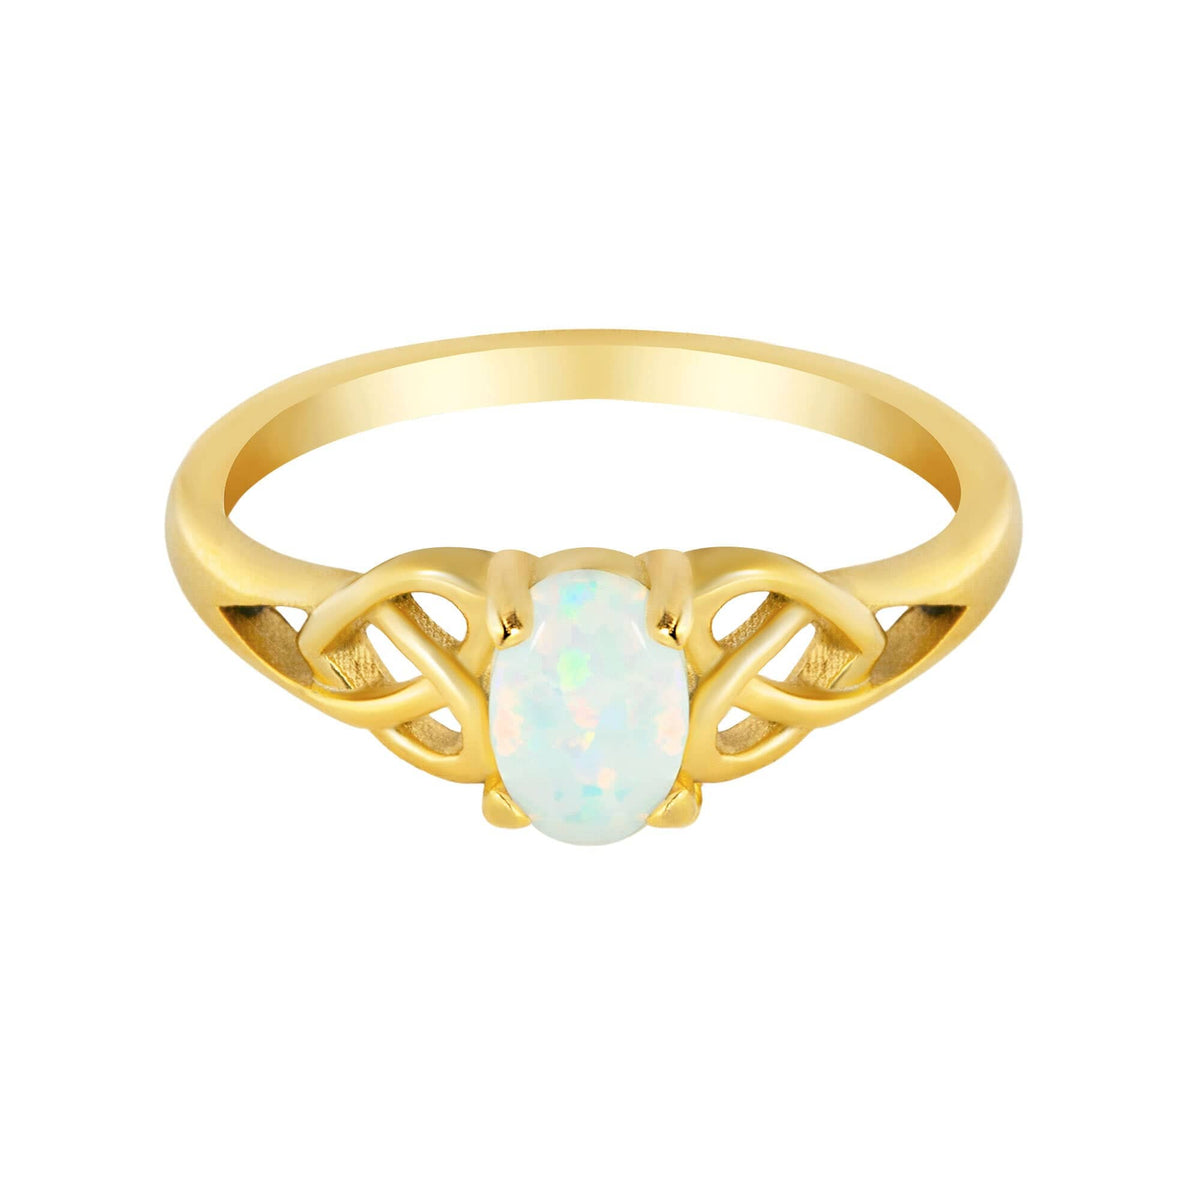 BohoMoon Stainless Steel Forest Opal Ring Gold / US 6 / UK L / EUR 51 (small)